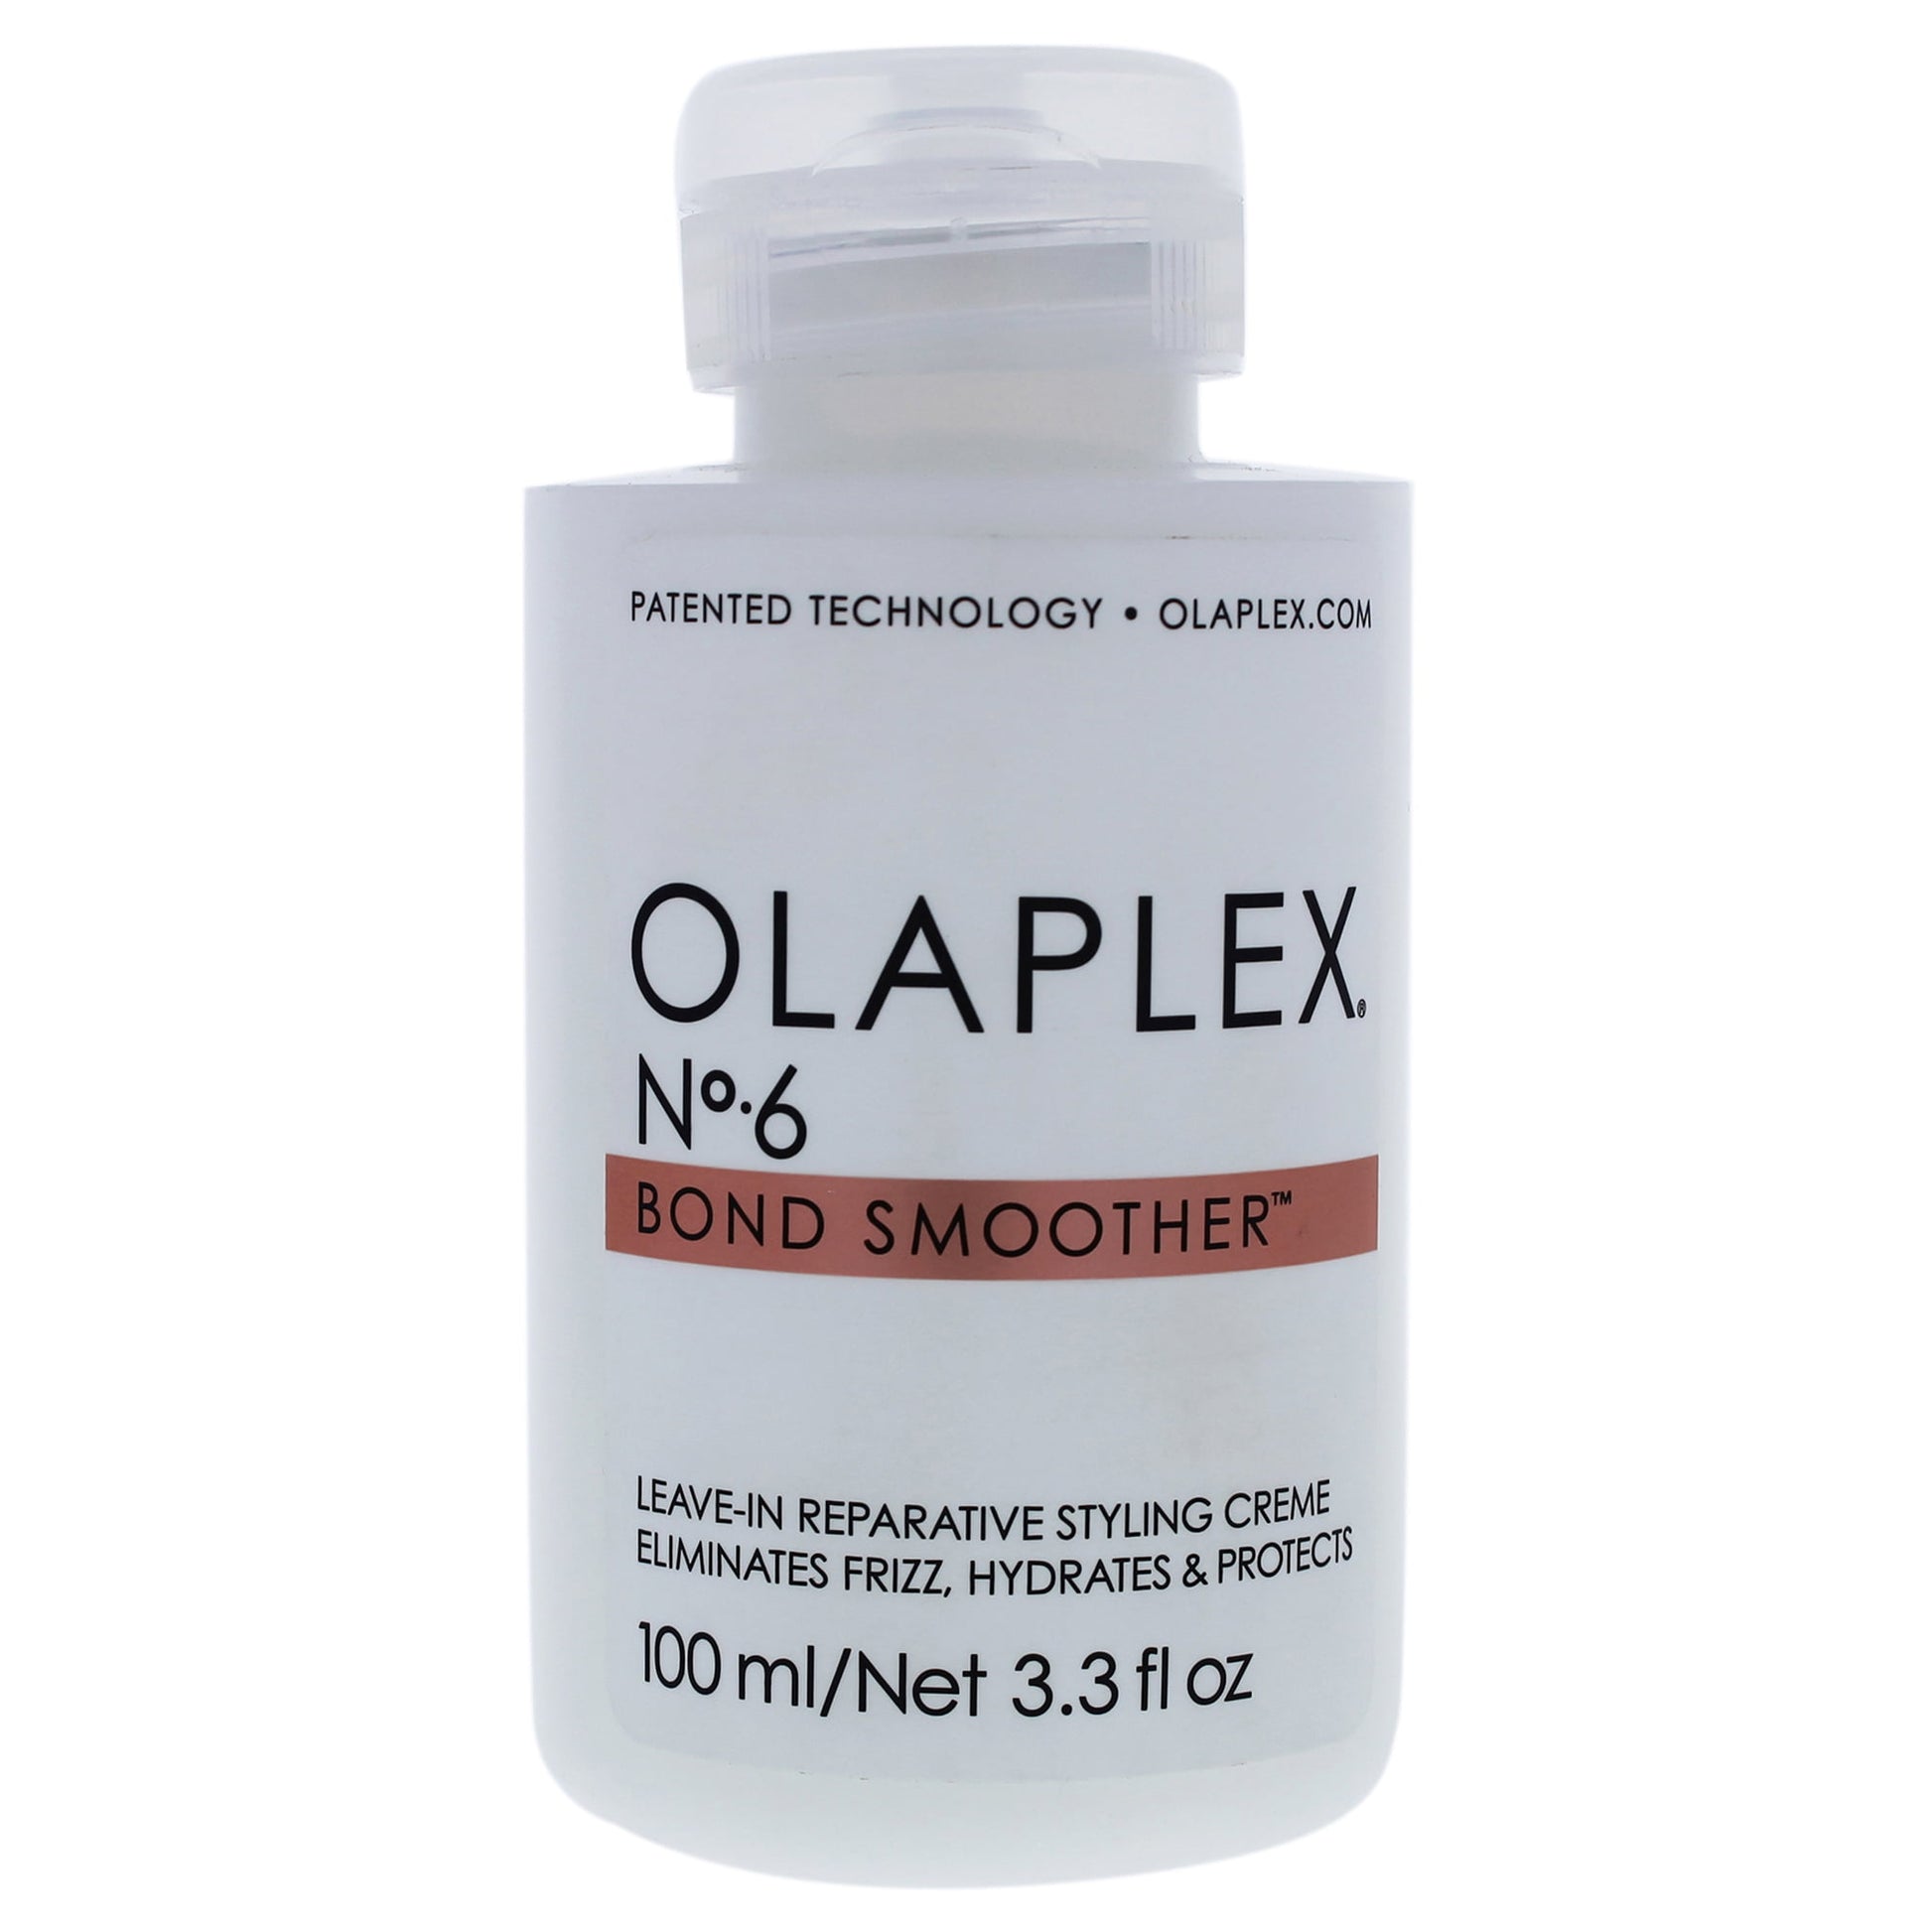 ($28 Value) Olaplex No. 6 Bond Smoother Leave-In Reparative Styling Cream, 3.3 Oz